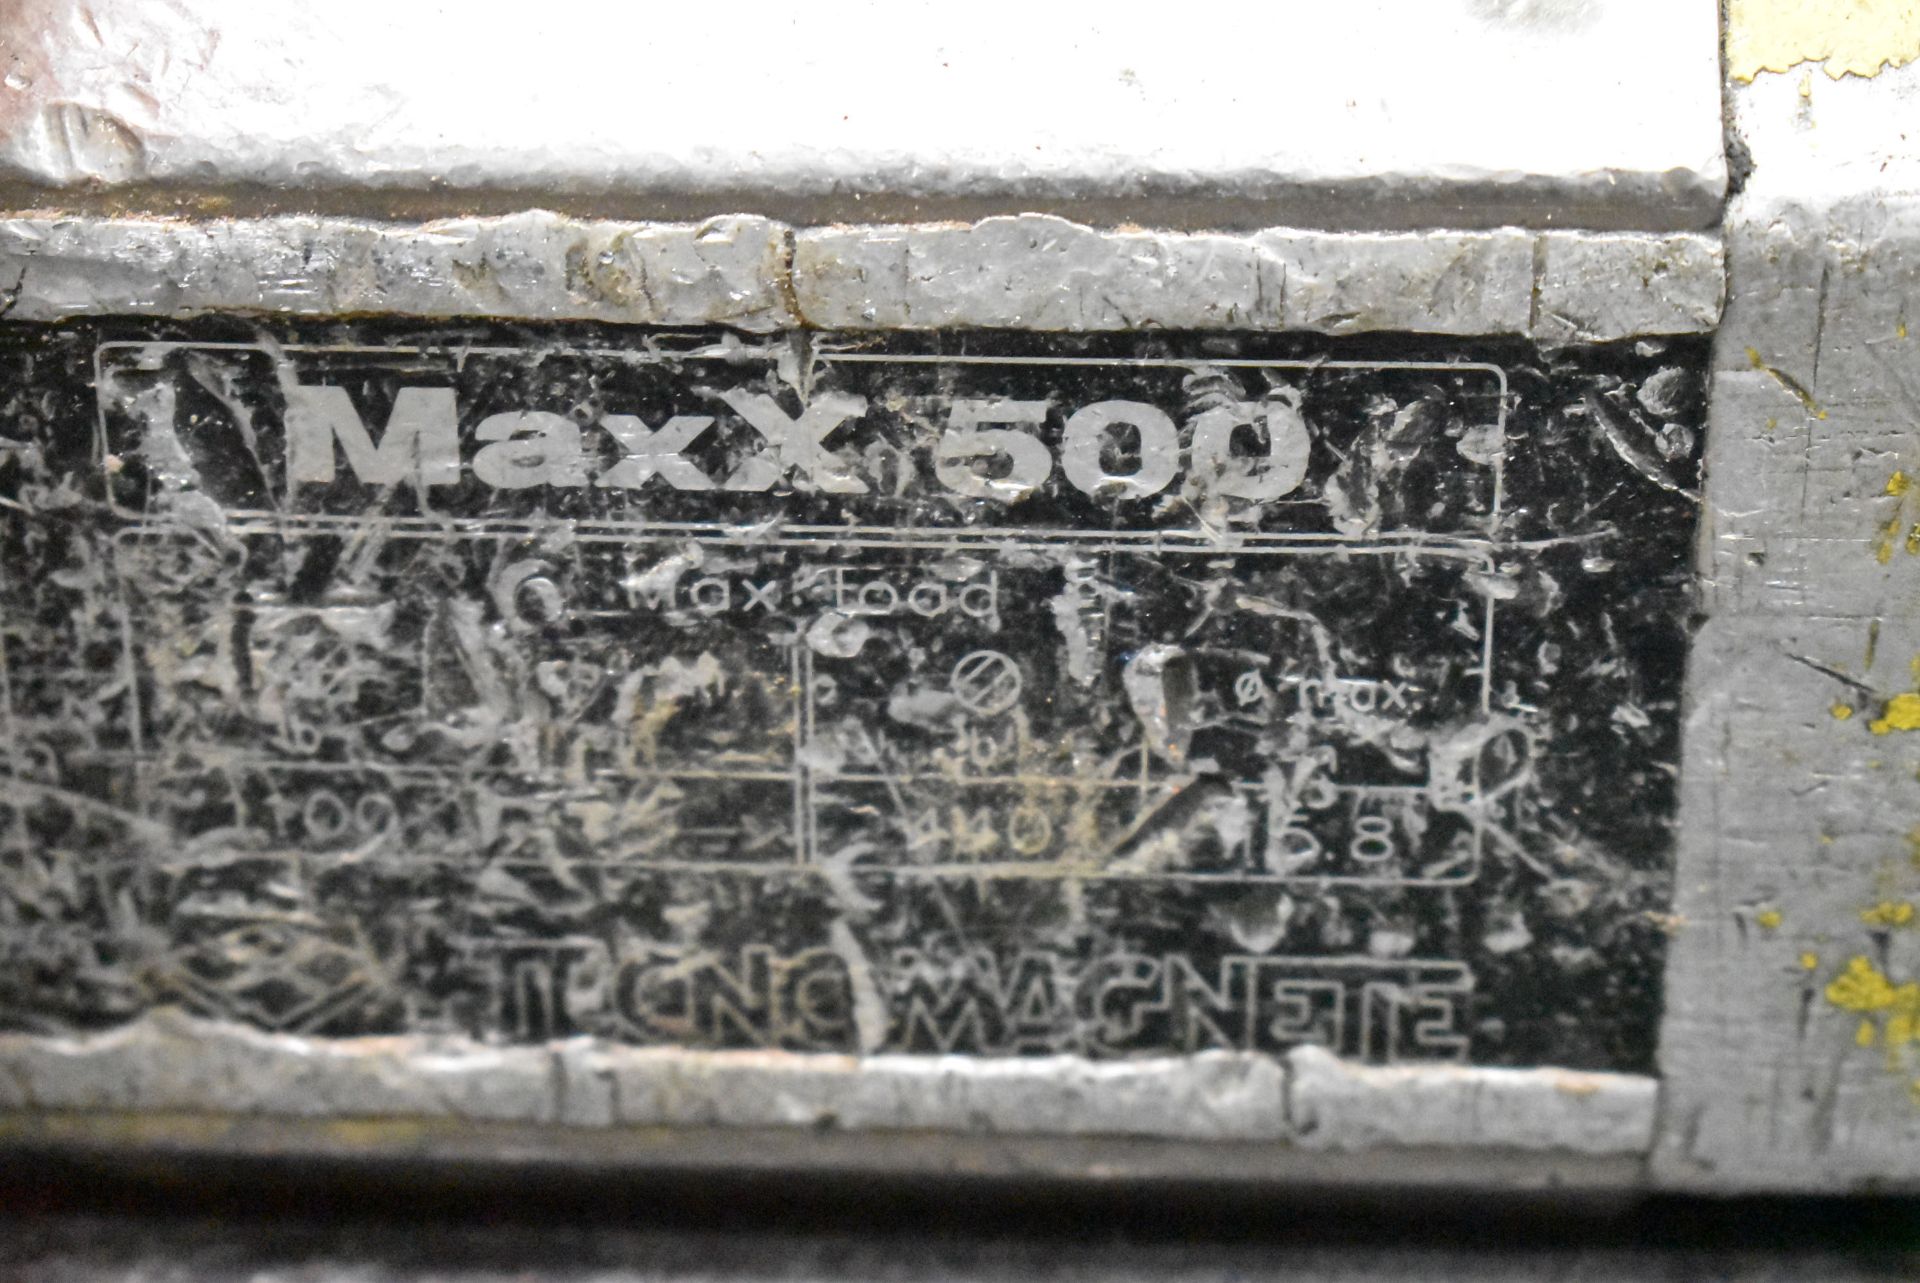 TECHNOMAGNETE MAXX 500 1,100 LB CAPACITY LIFTING MAGNET, S/N N/A - Image 2 of 3